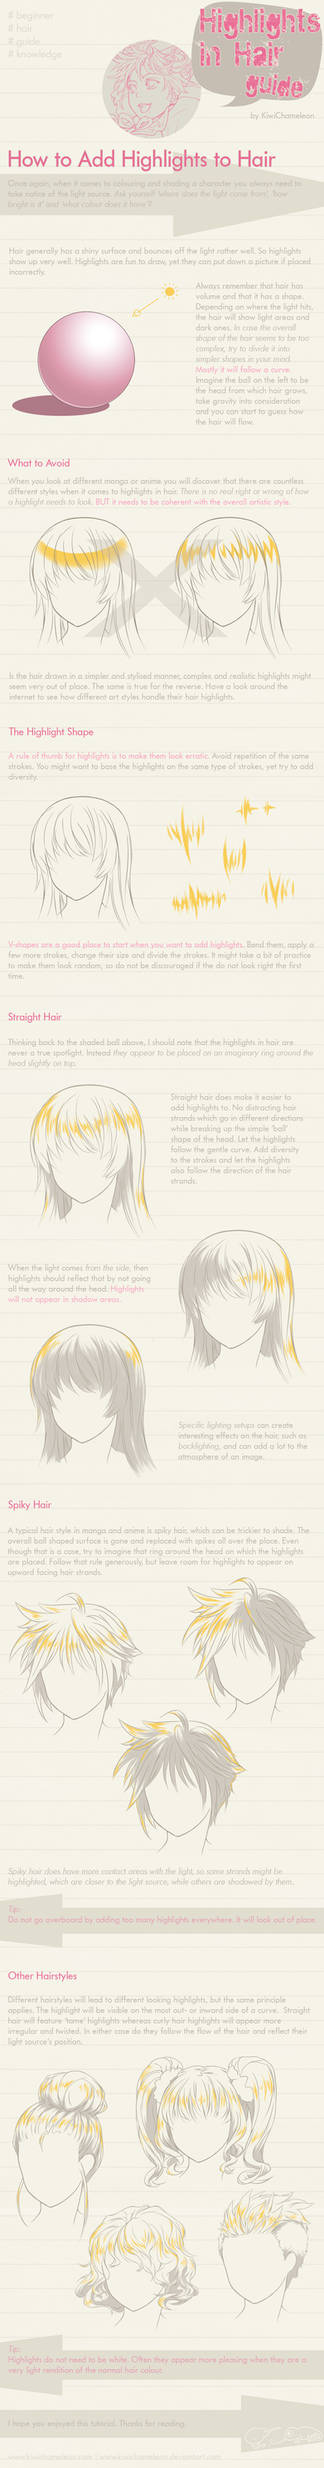 Highlights in Hair - guide